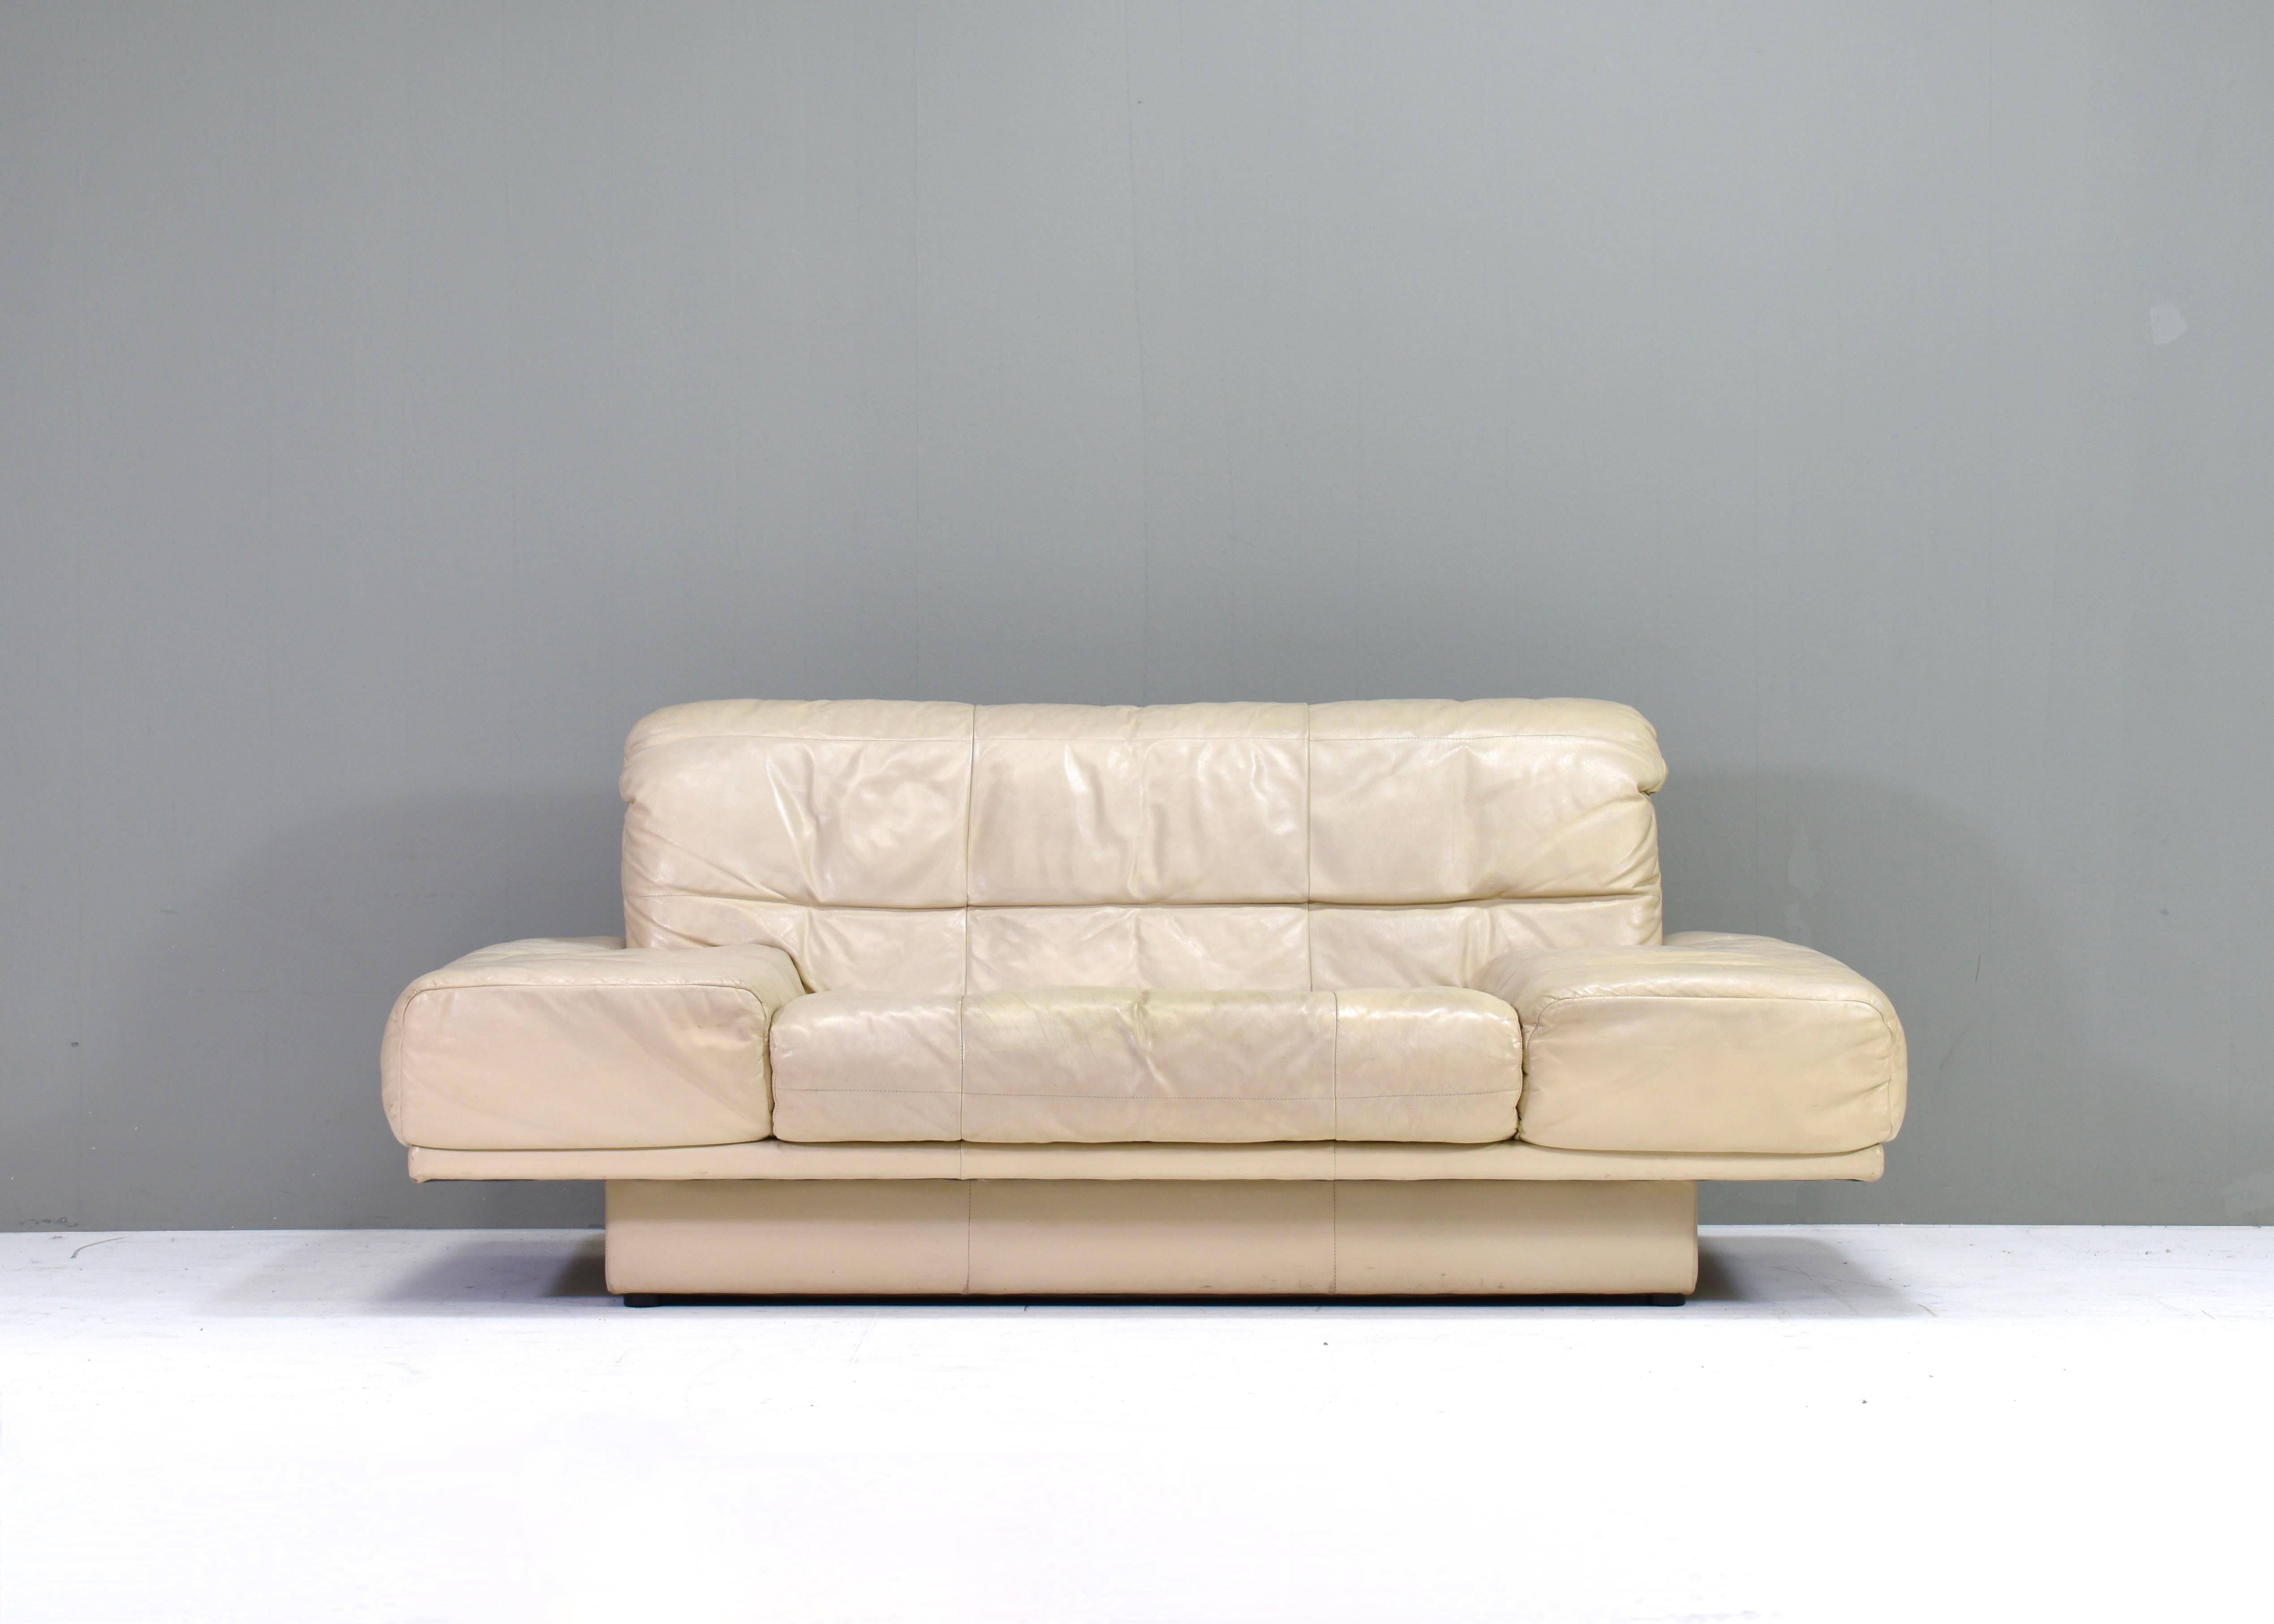 Pair of Rolf Benz sofa’s 2-seat and 3-seat – Germany, circa 1980-1990 For Sale 6